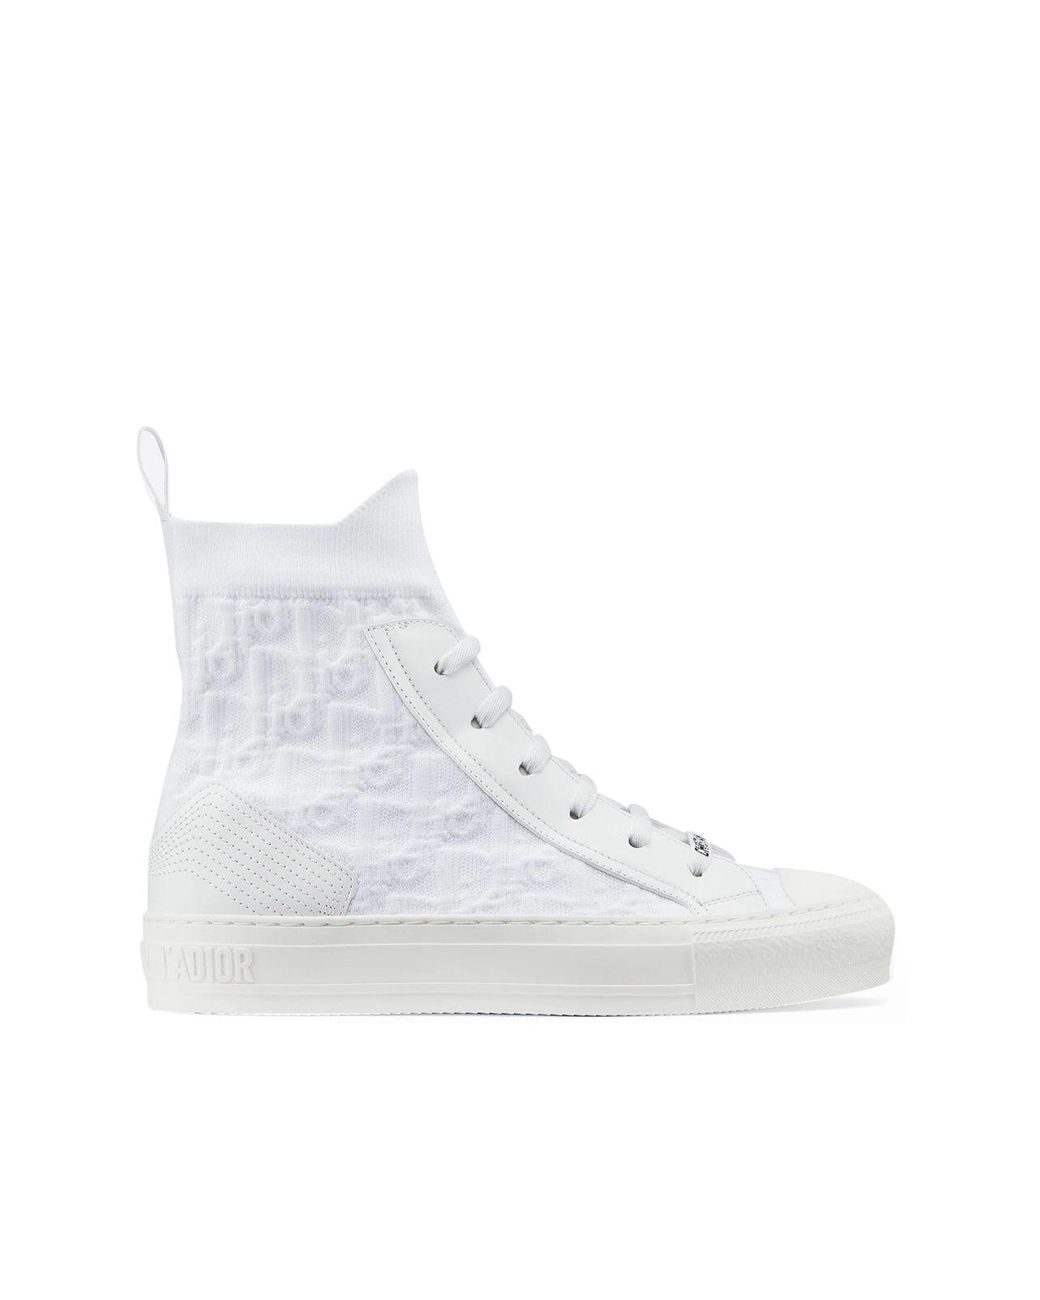 Dior Mid-high Sneakers Walk `n` Dior in White | Lyst